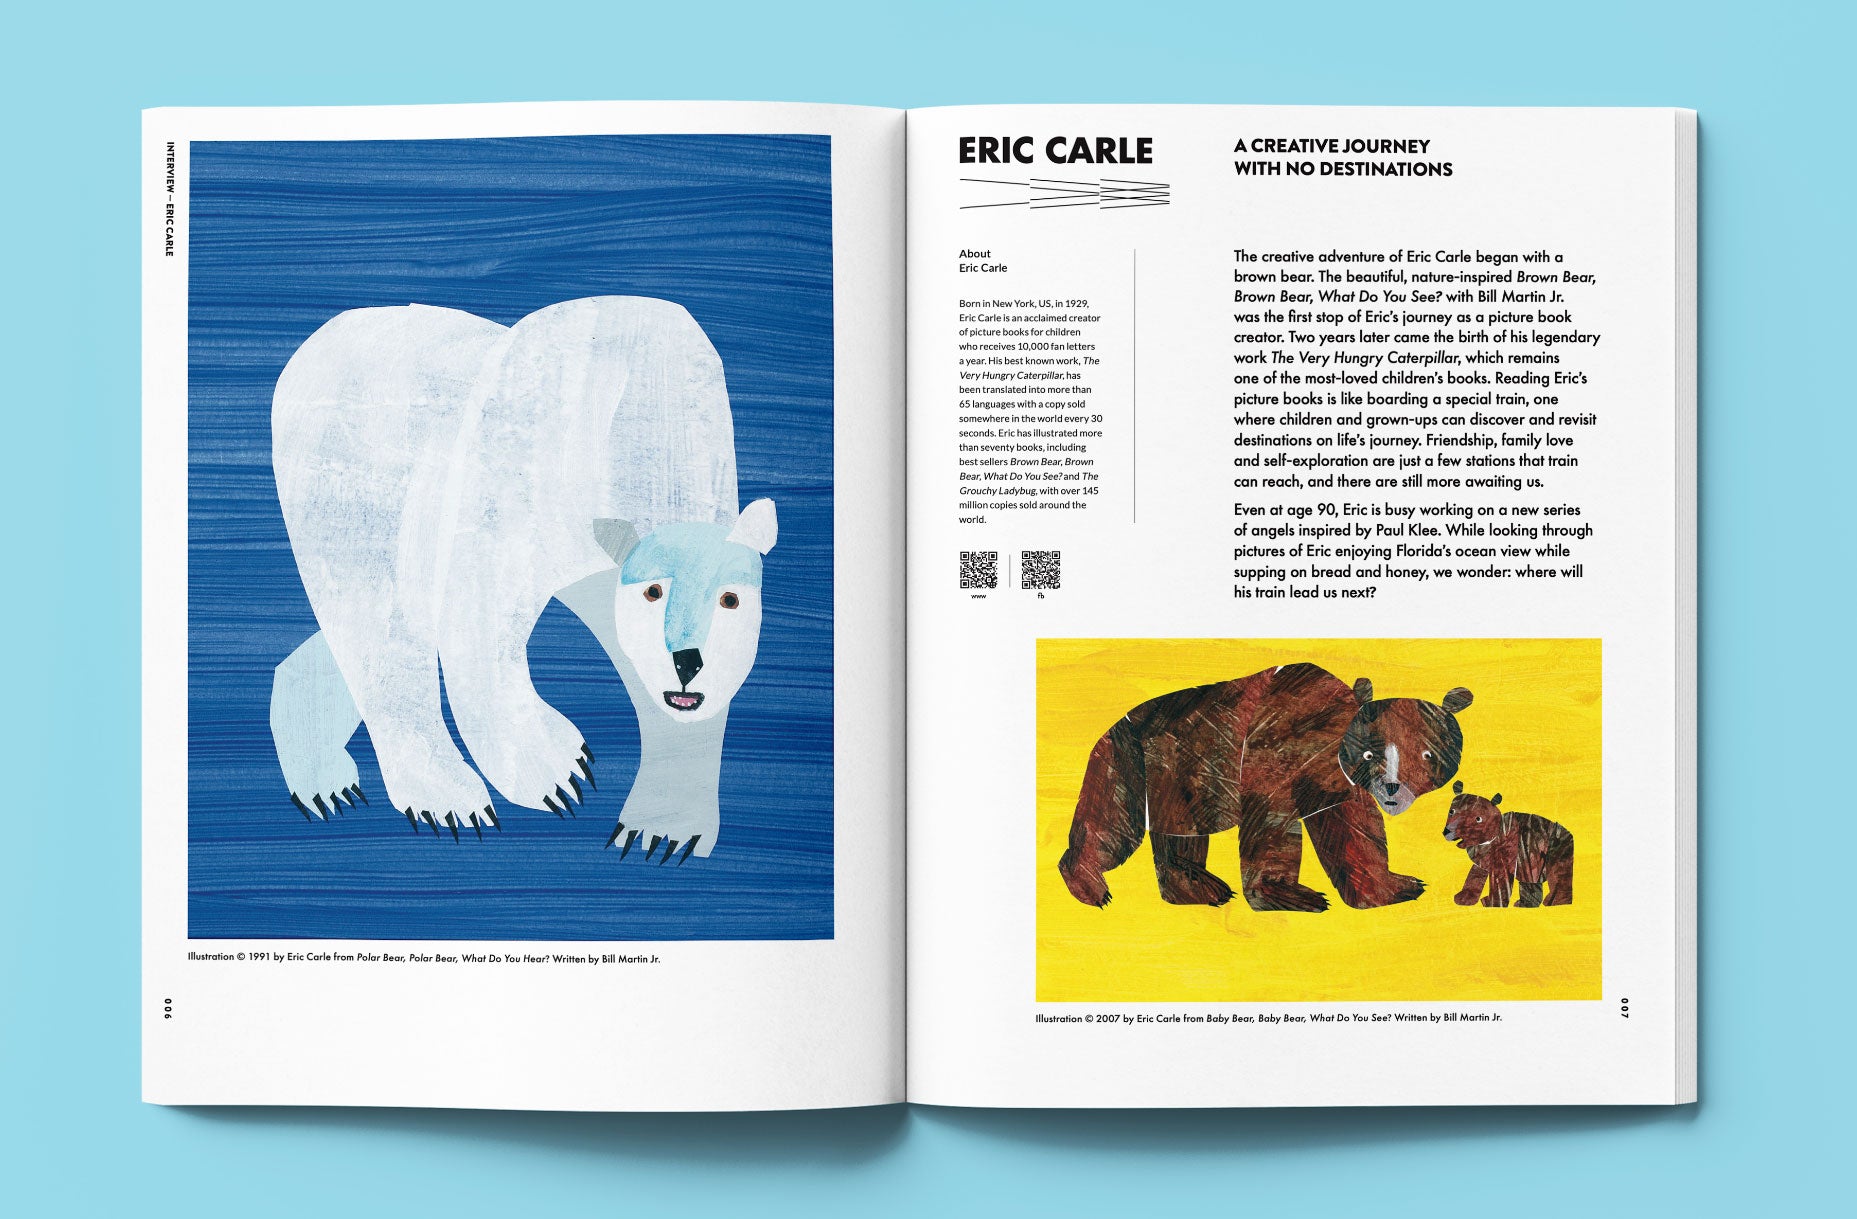 AWW Magazine Issue 2 Please Look After These Bears, Thank You! – AWWYOURS